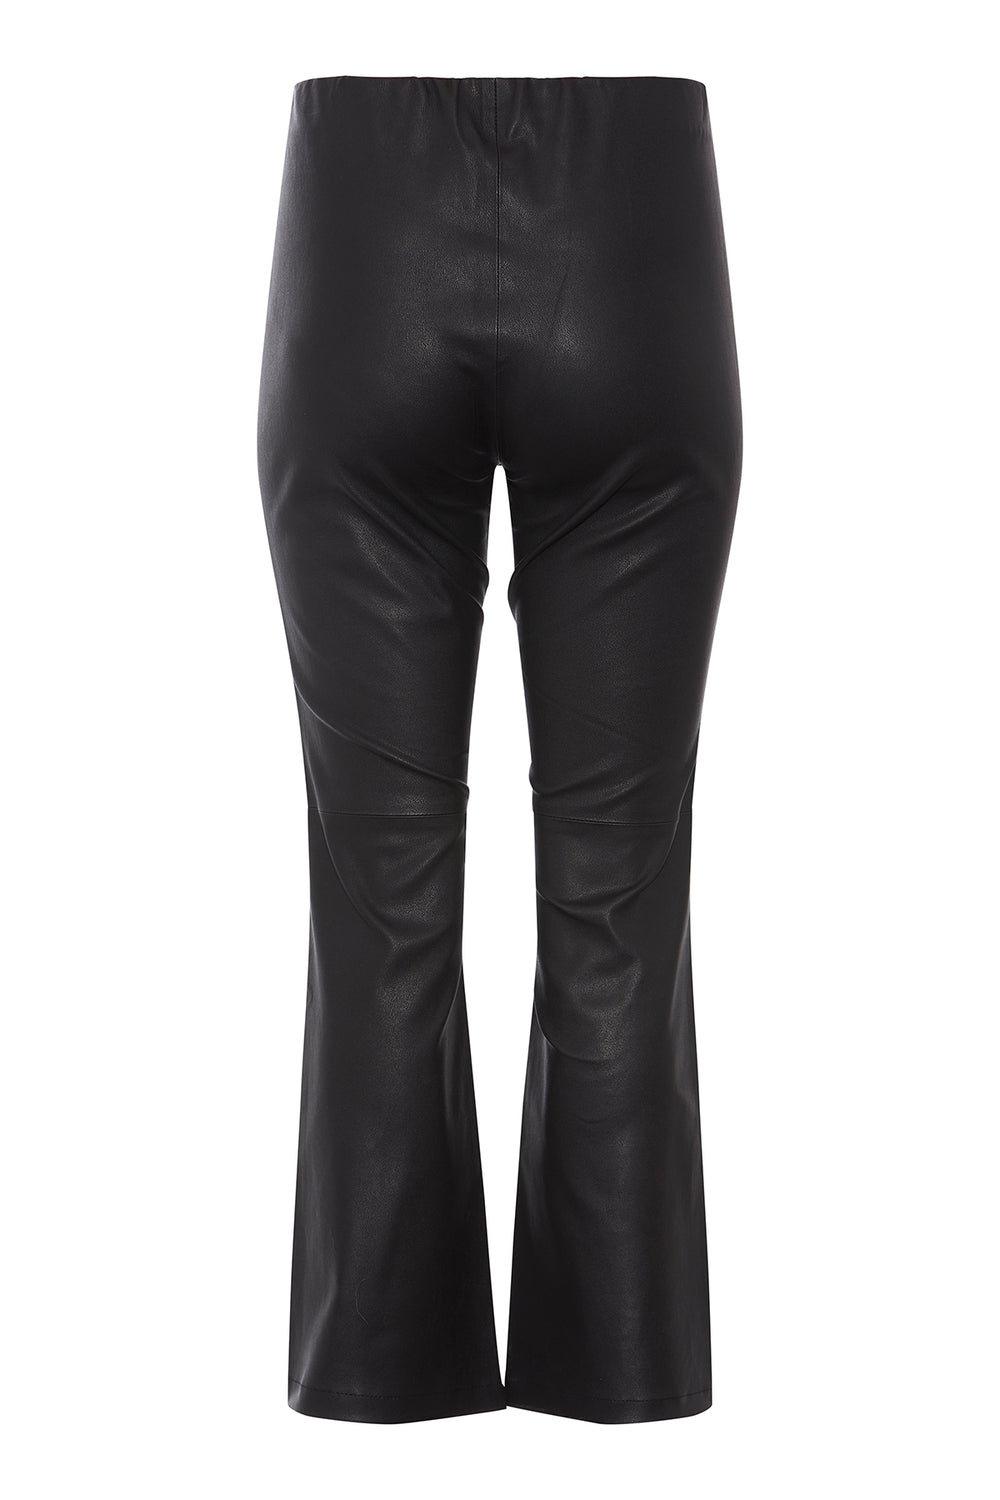 PBO Timothy leather pants TROUSERS 20 Black